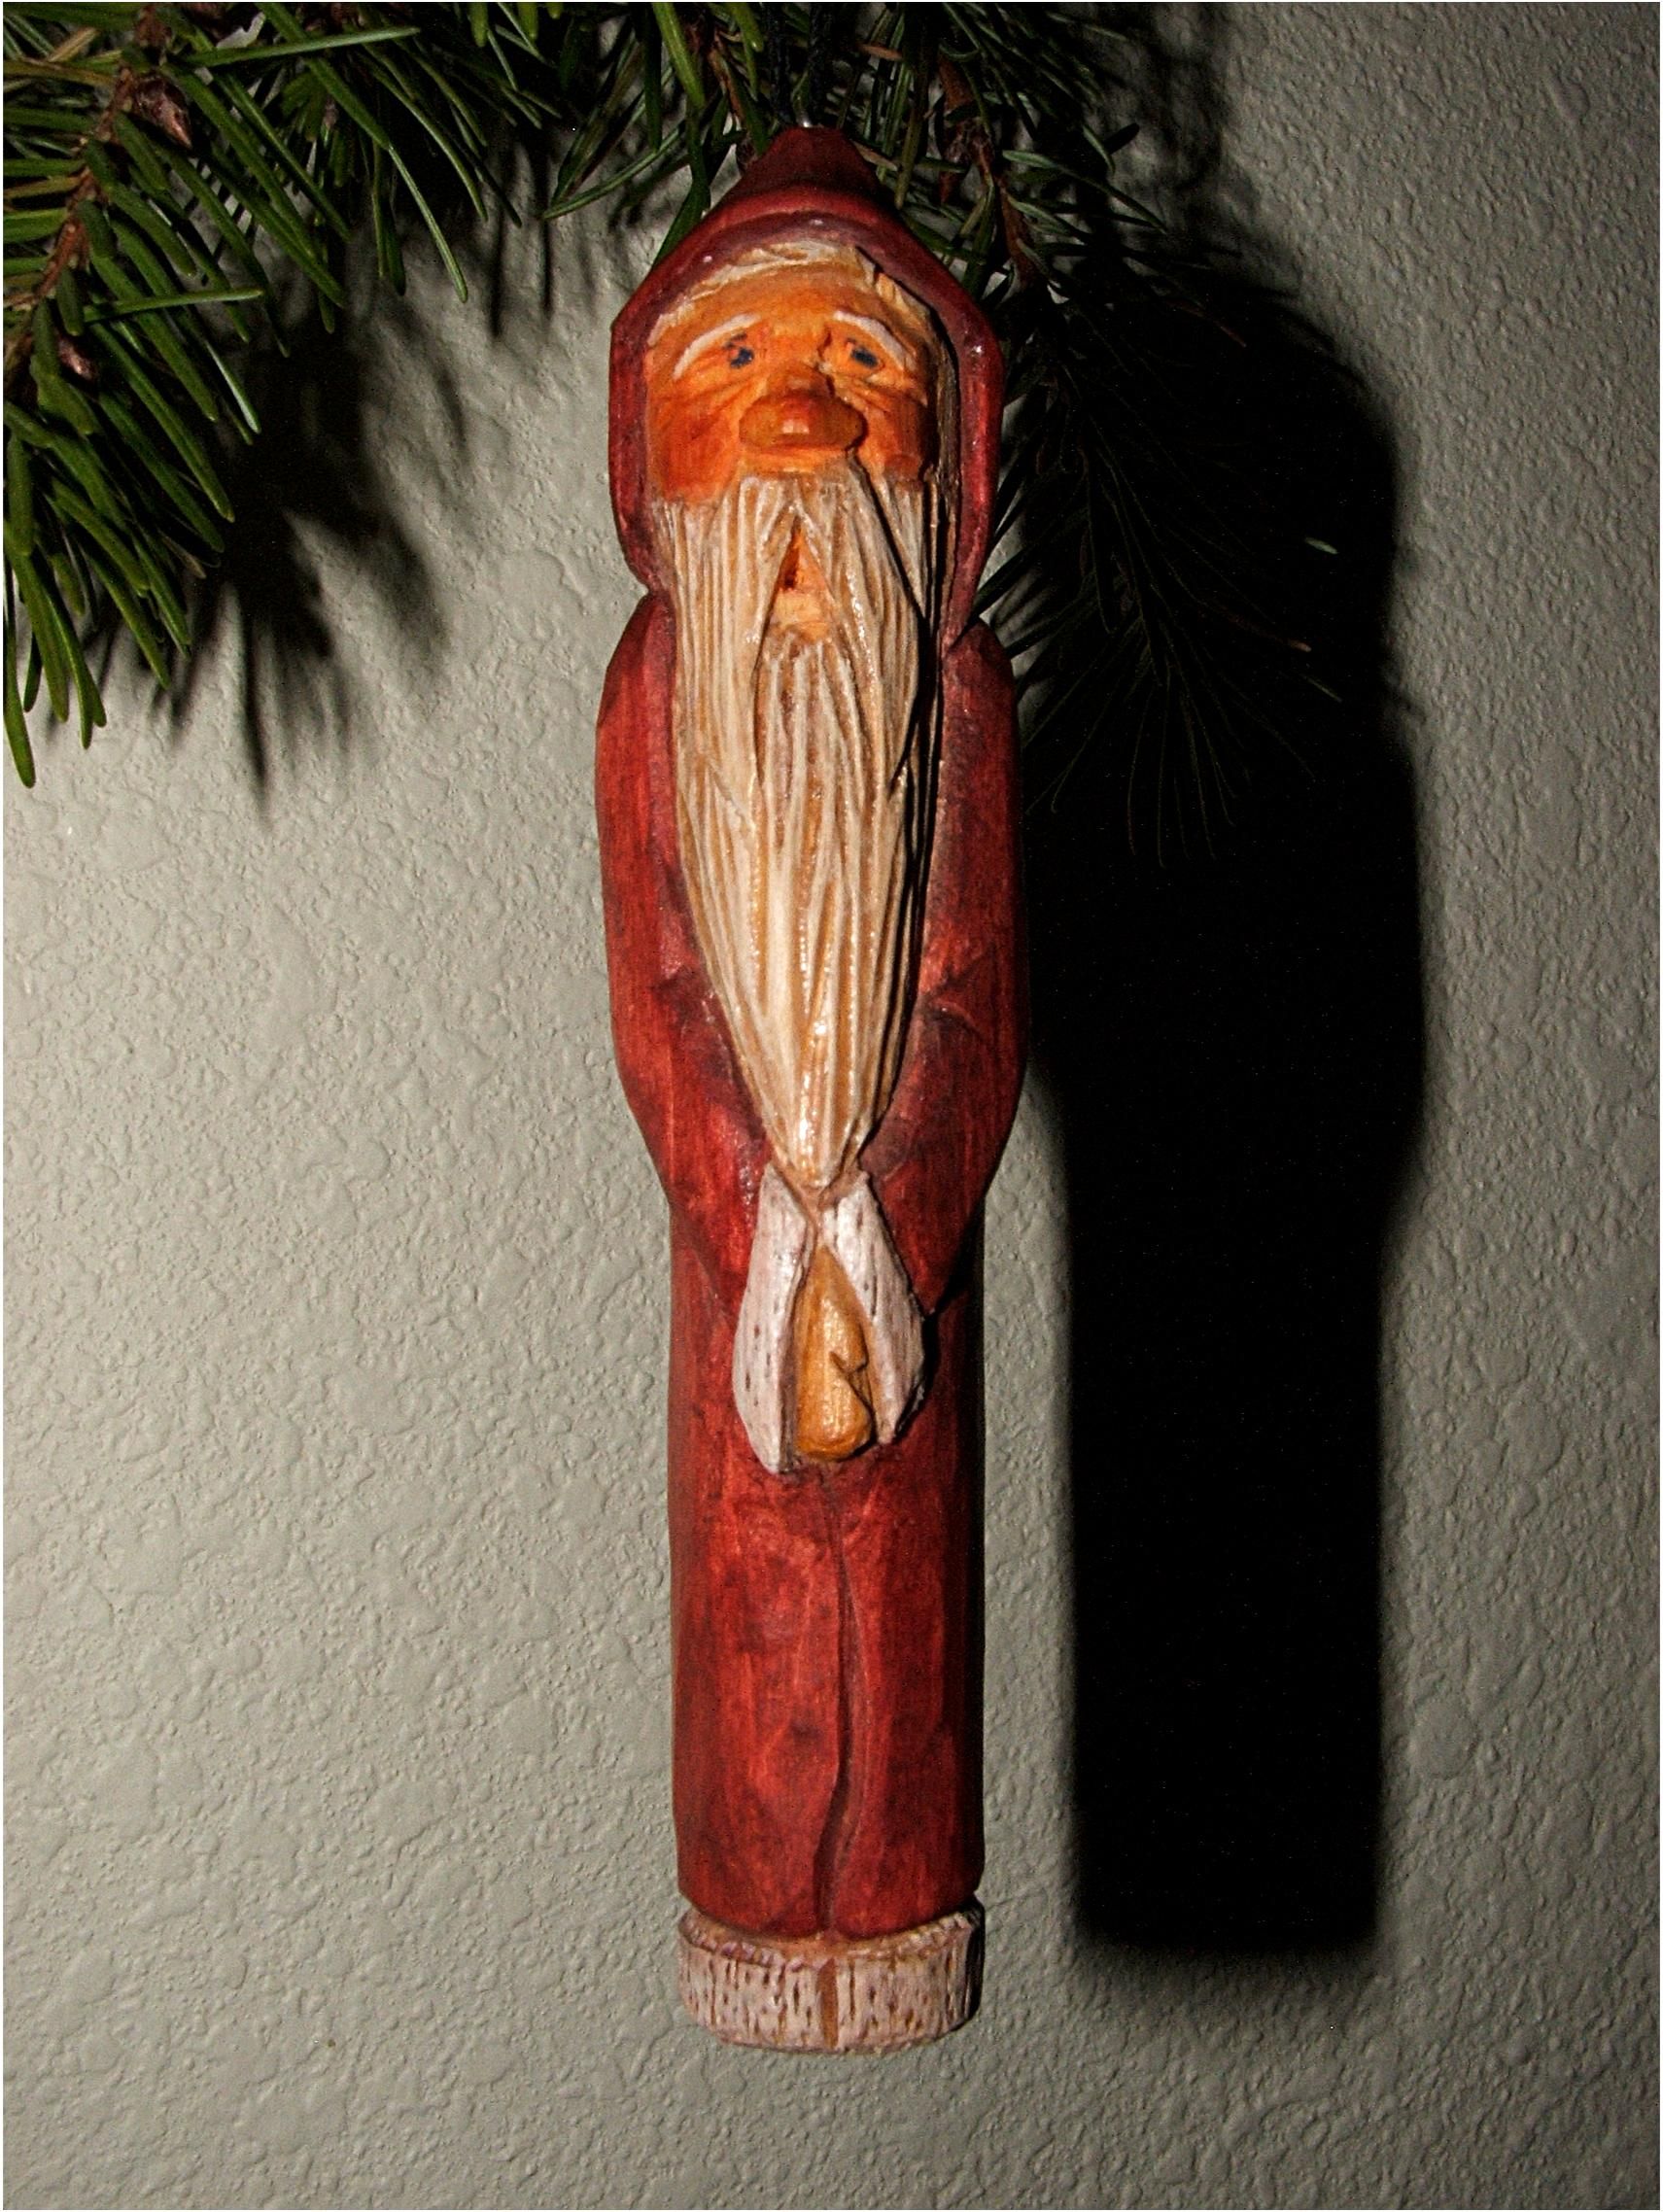  Ornaments Hand Carved and or Burned Cindy Adams Design